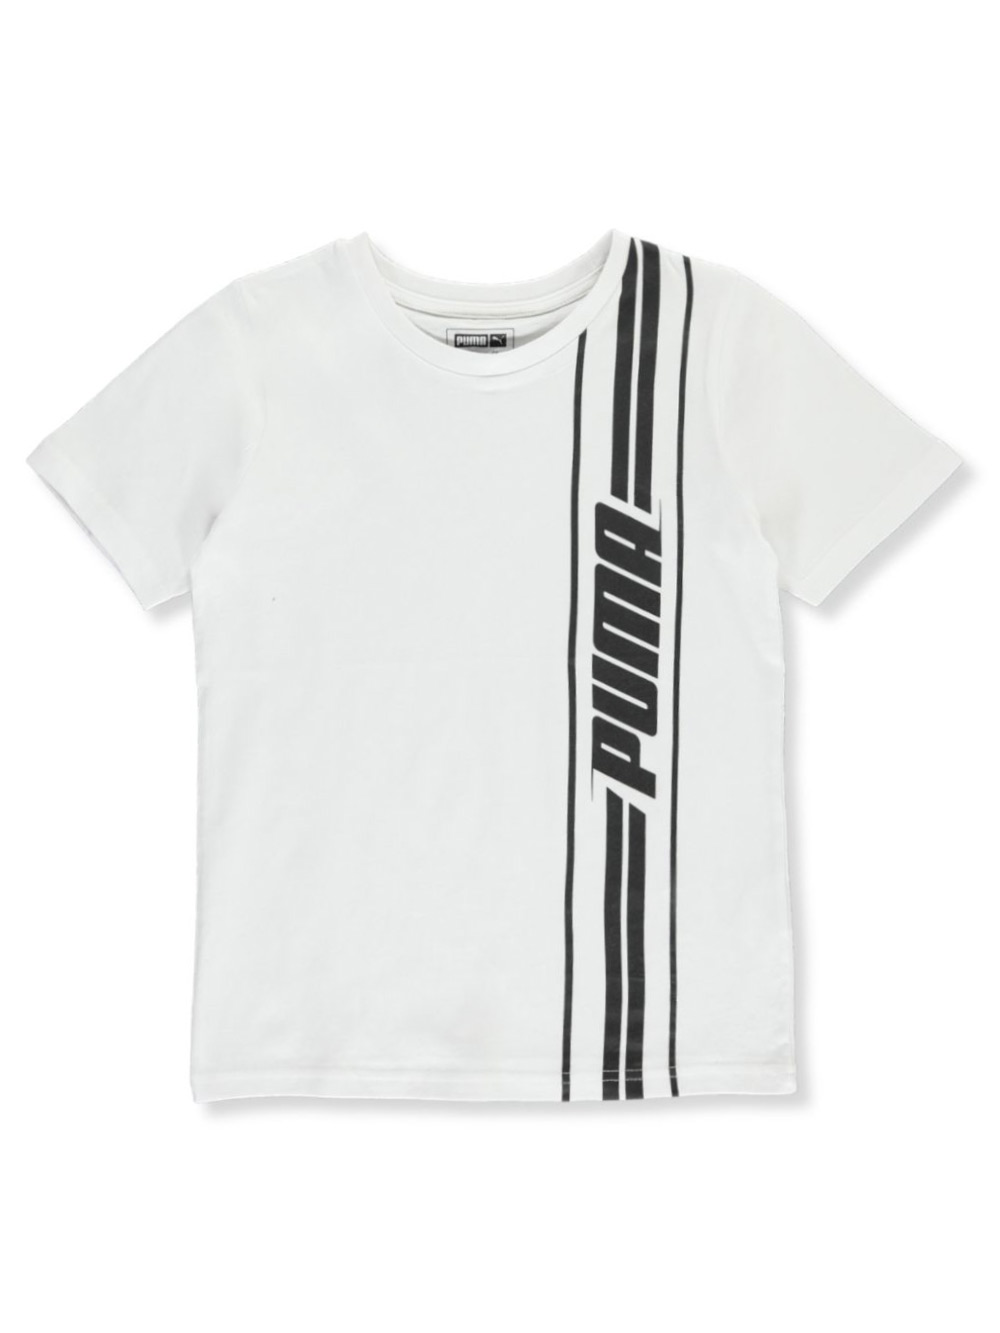 Boys Performance Side Stripe Logo T Shirt By Puma In White From